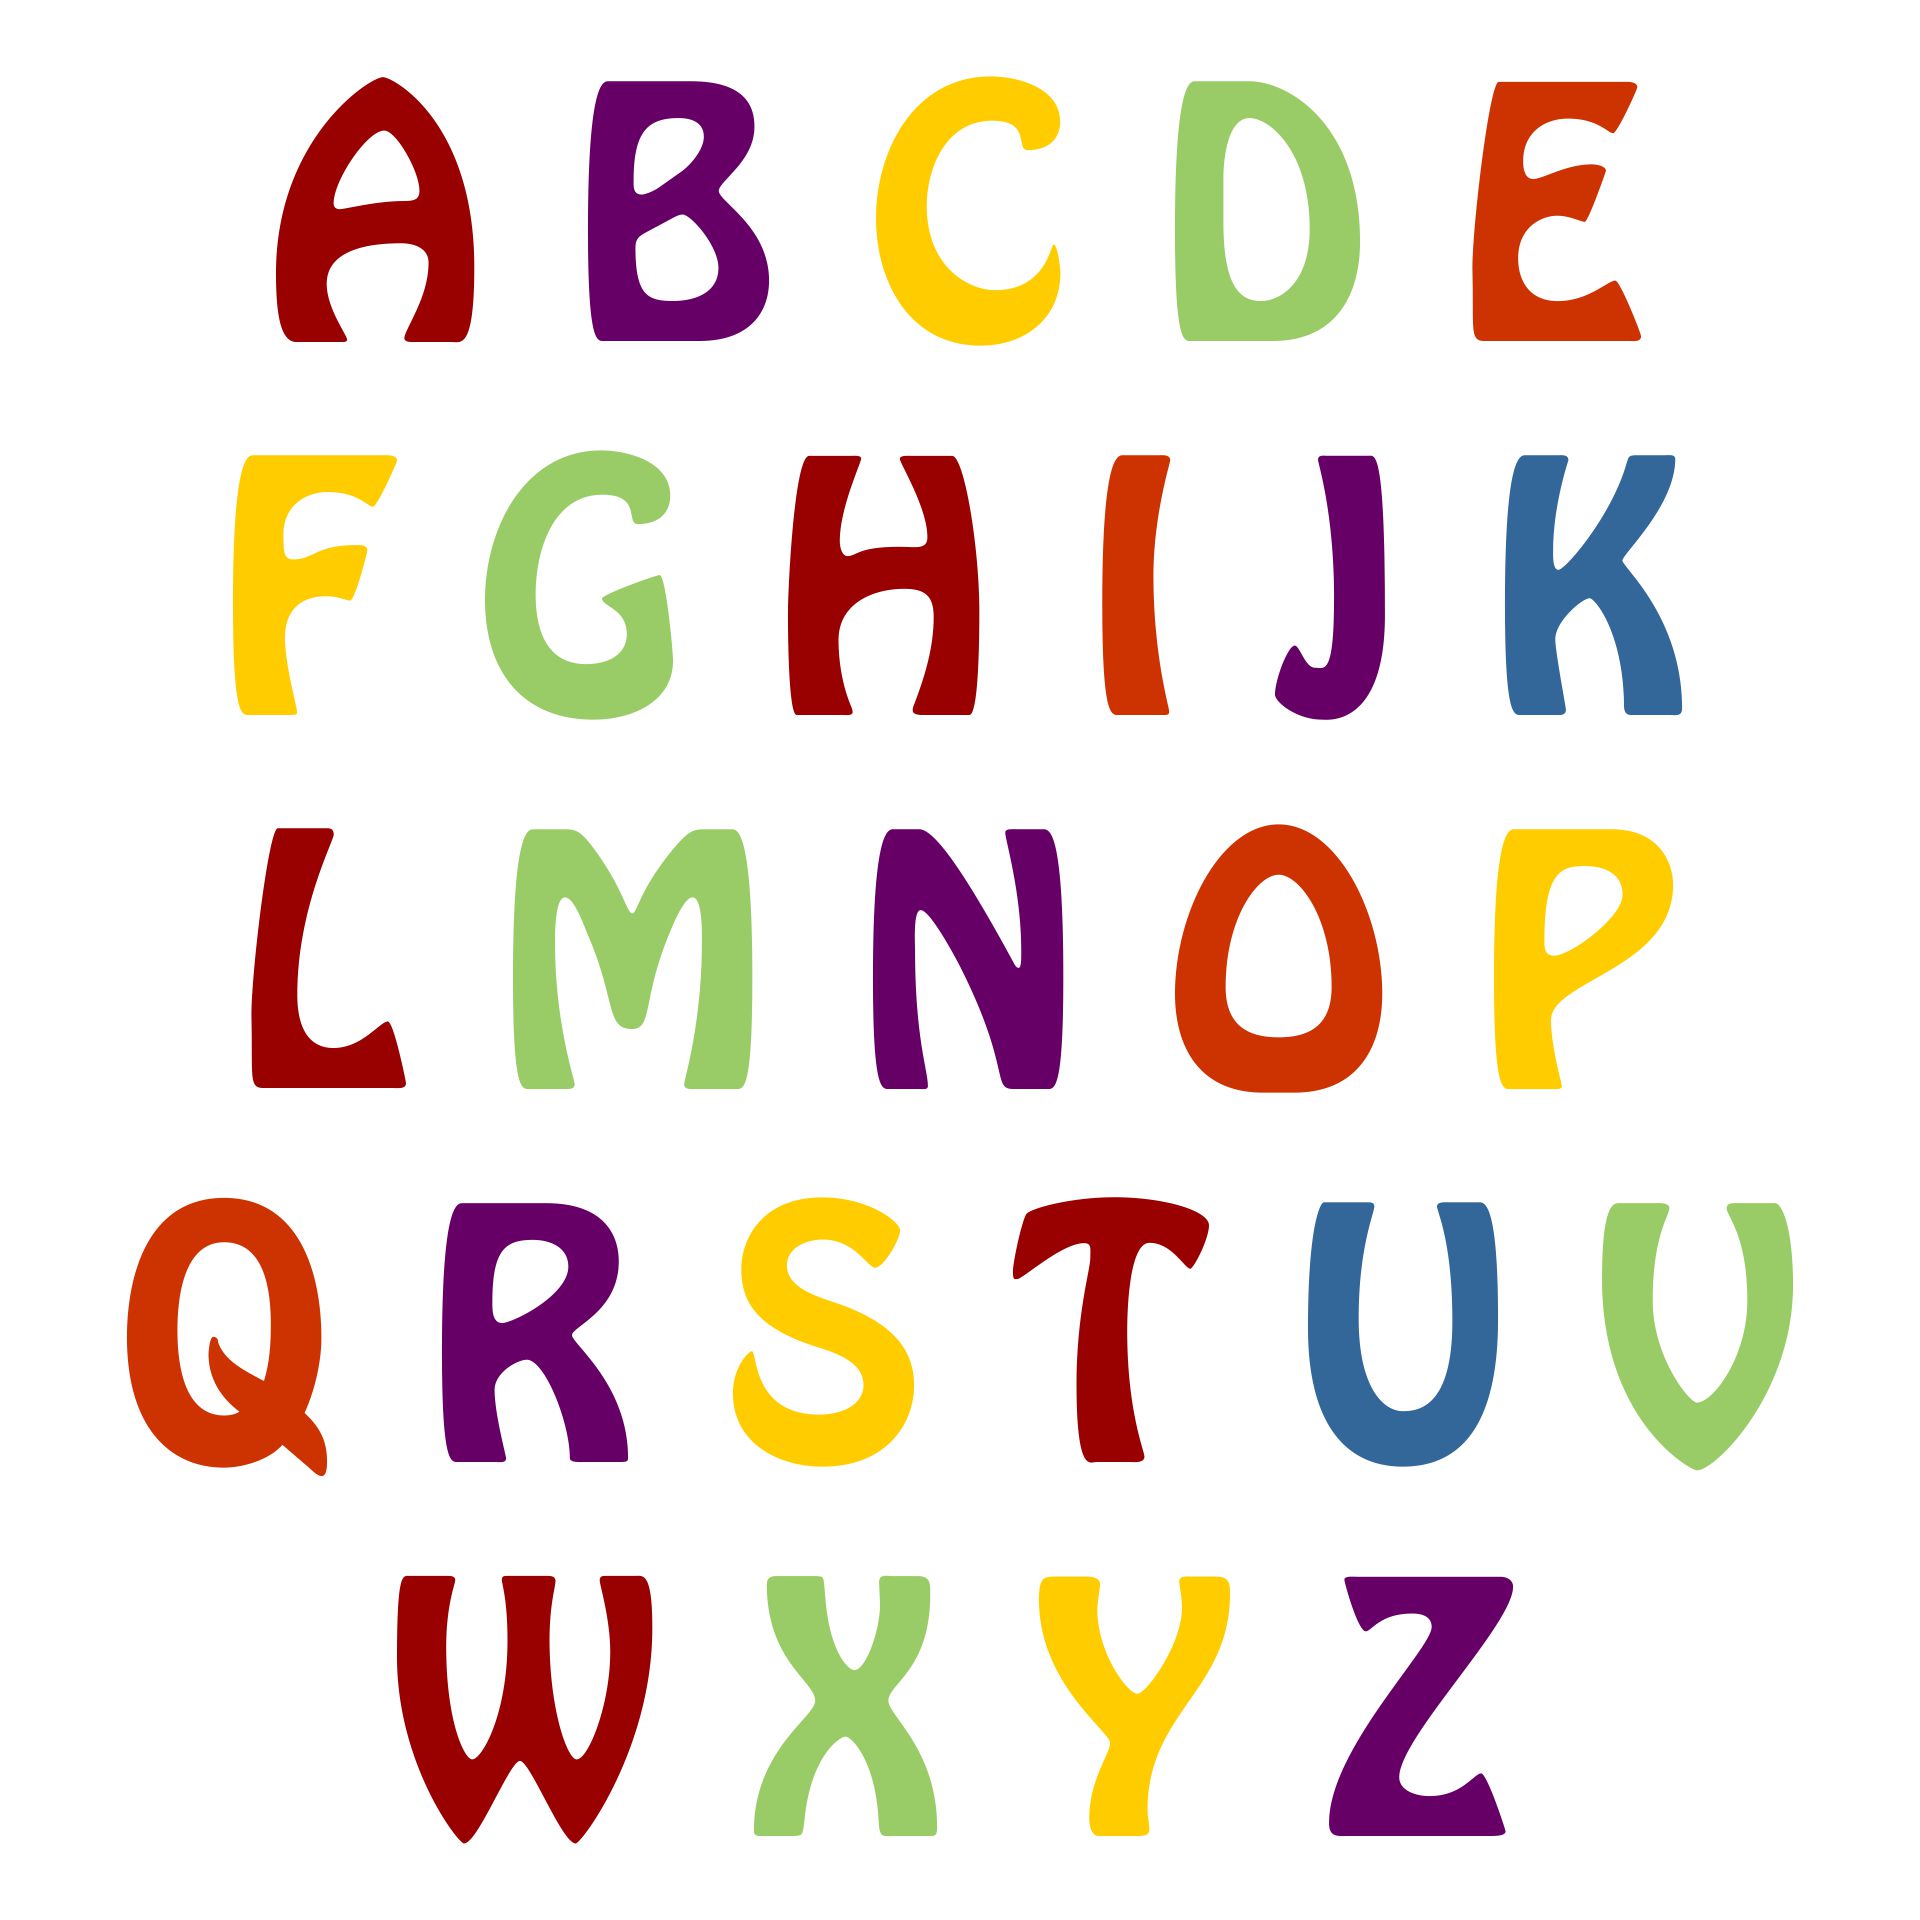 6-best-images-of-printable-alphabet-letters-to-cut-small-alphabet